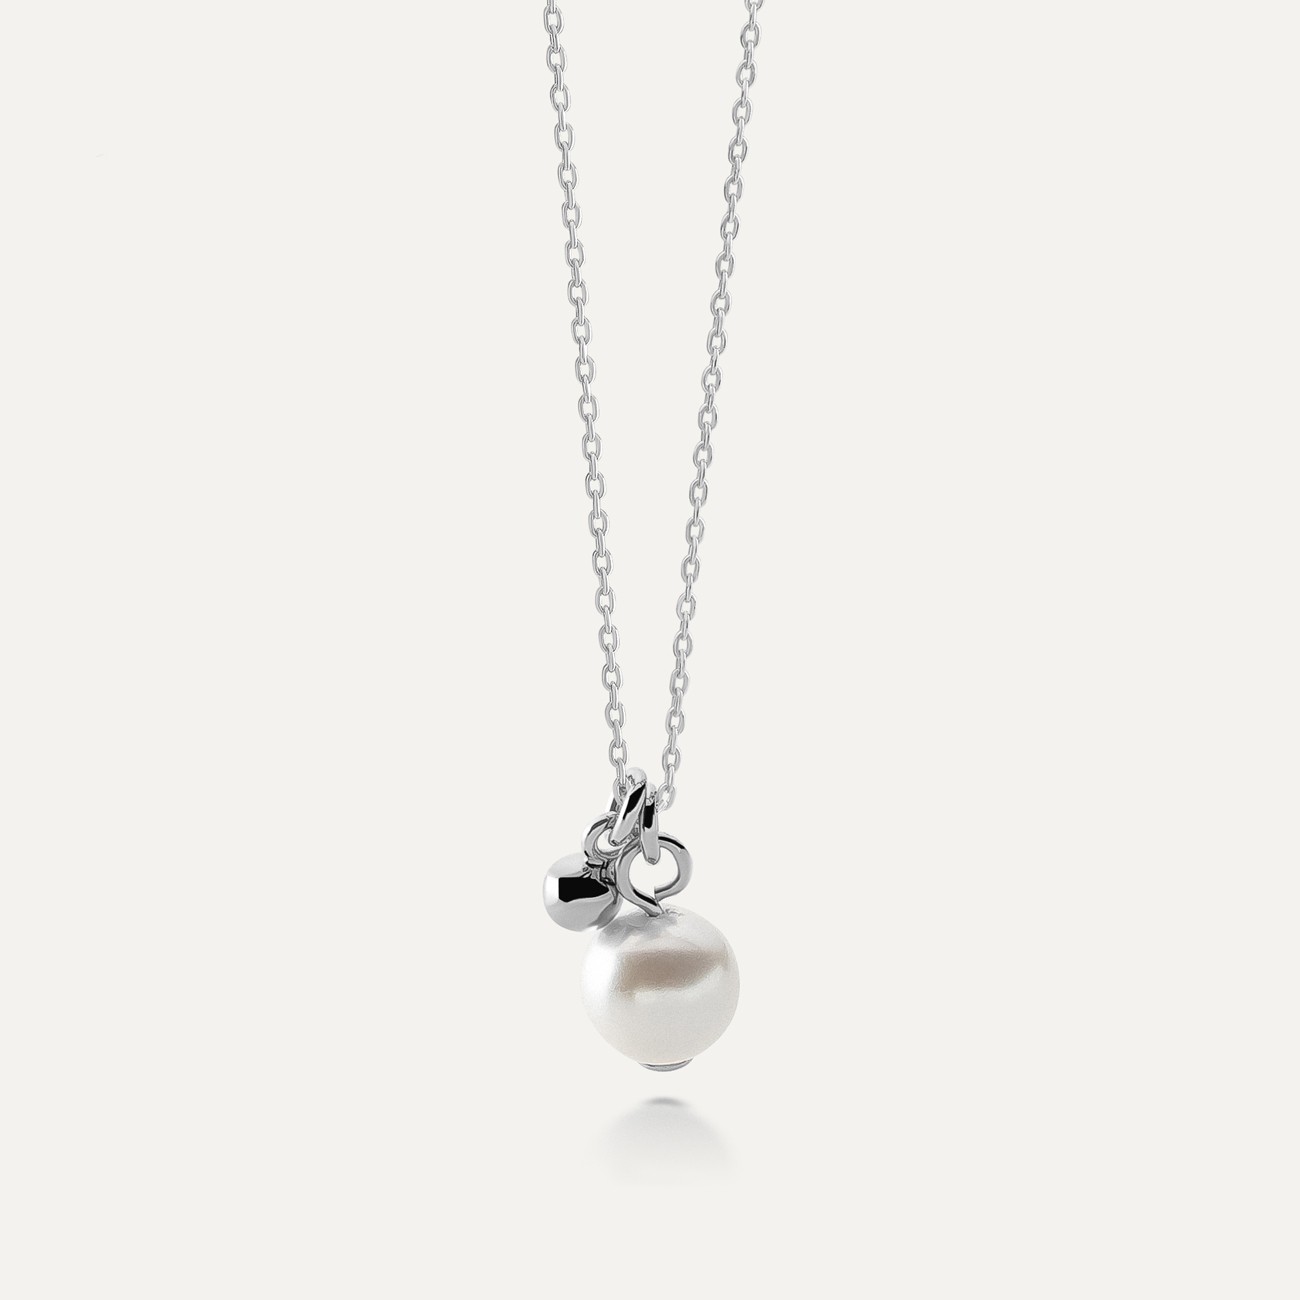 NECKLACE WITH PEARL, STERLING SILVER 925